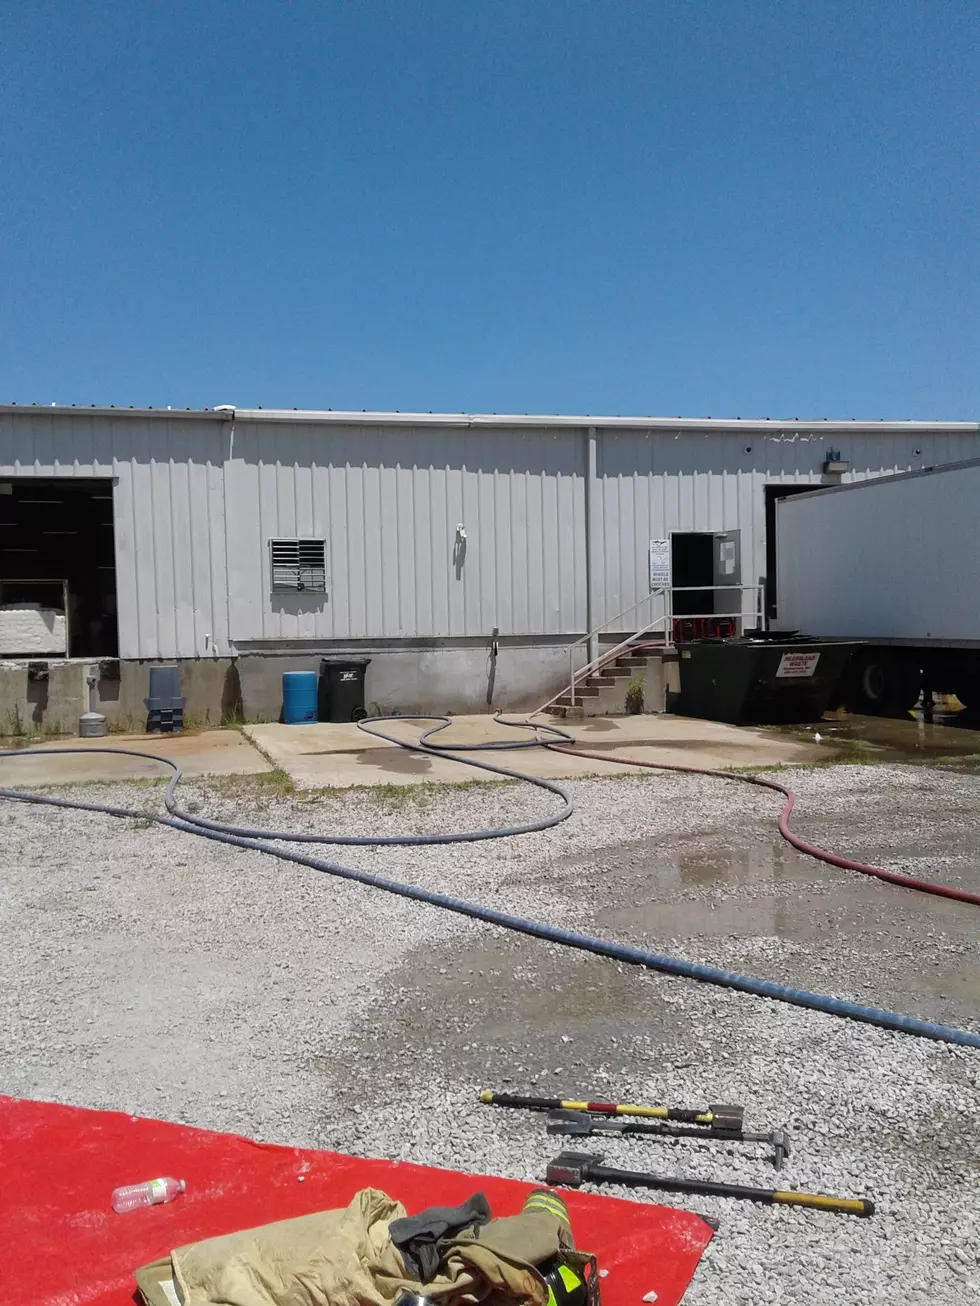 Warrensburg Structure Fire at ‘Rise Community Services’ Under Investigation